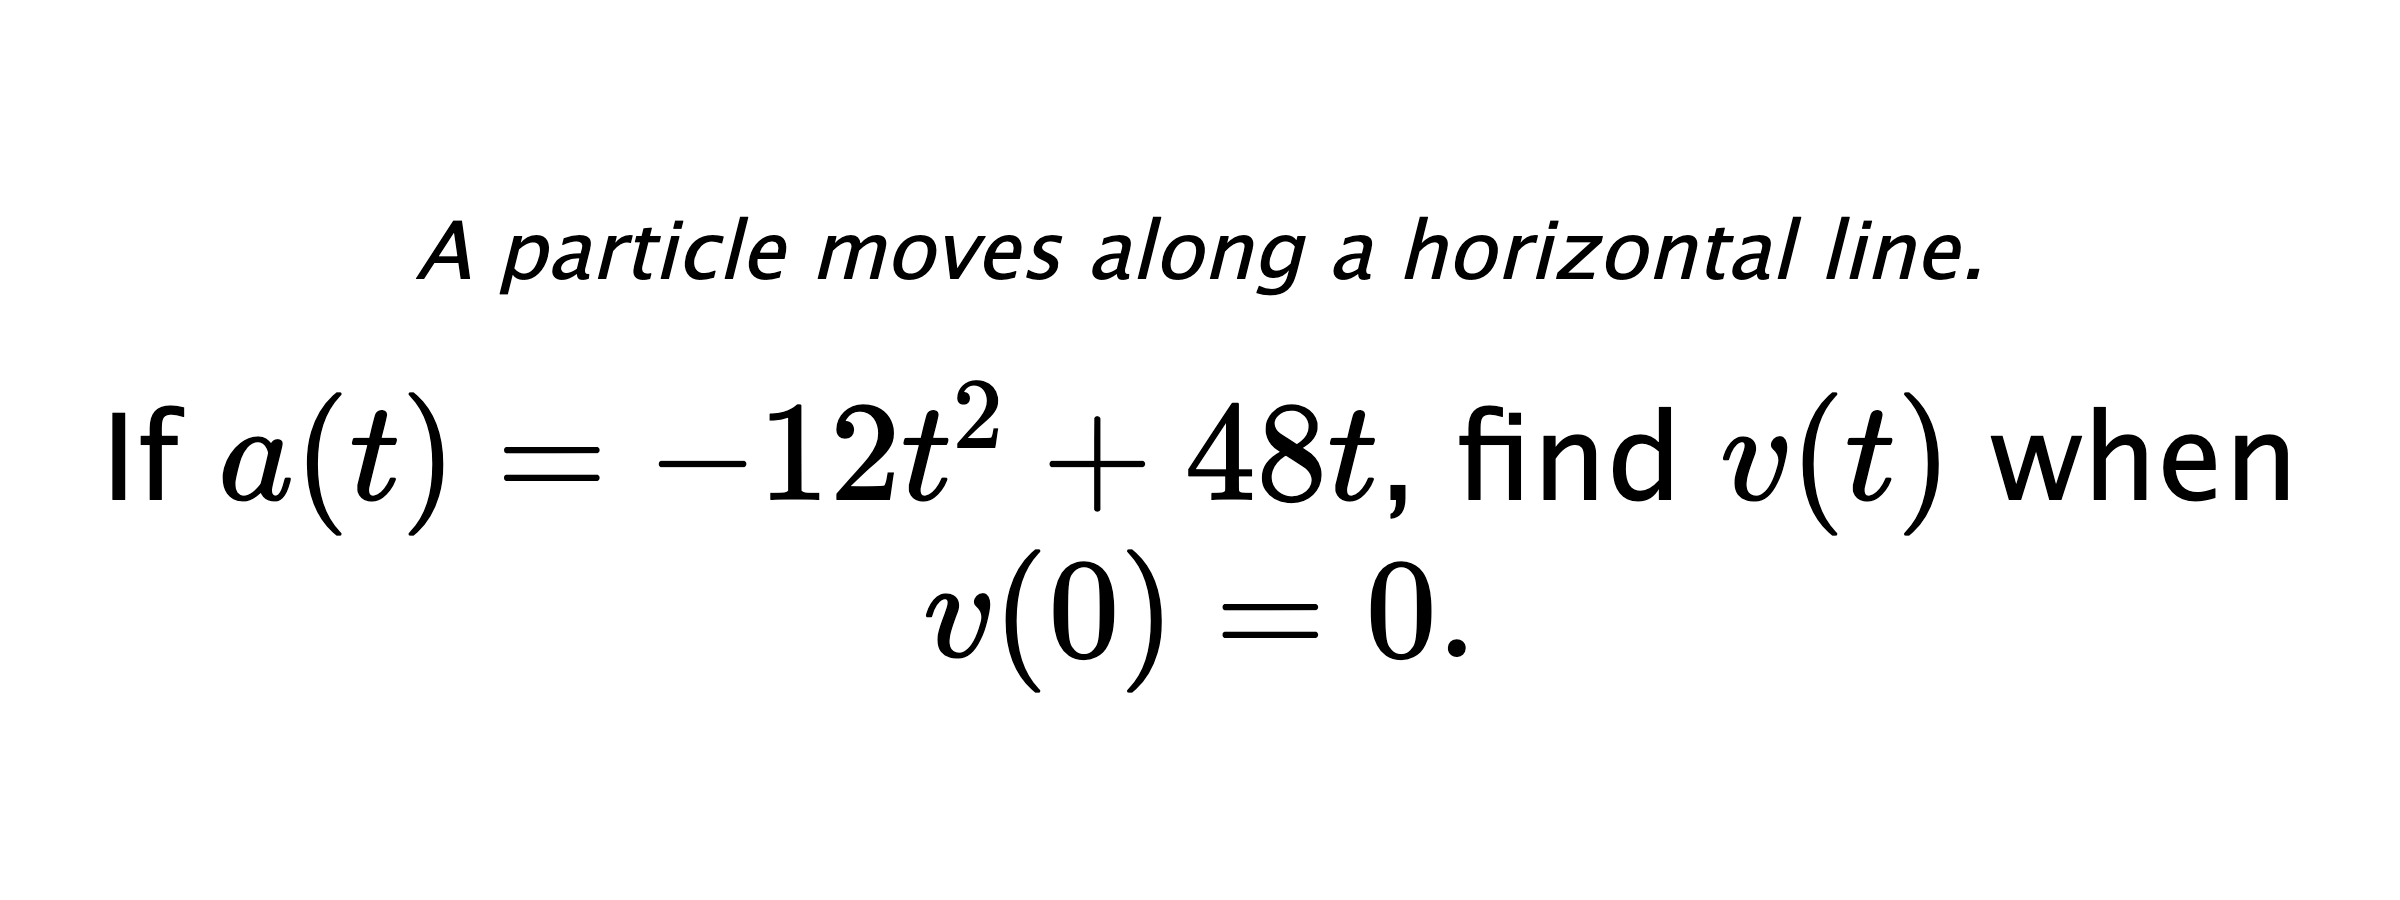 A particle moves along a horizontal line. If $ a(t)=-12t^2+48t $, find $ v(t) $ when $ v(0)=0 .$